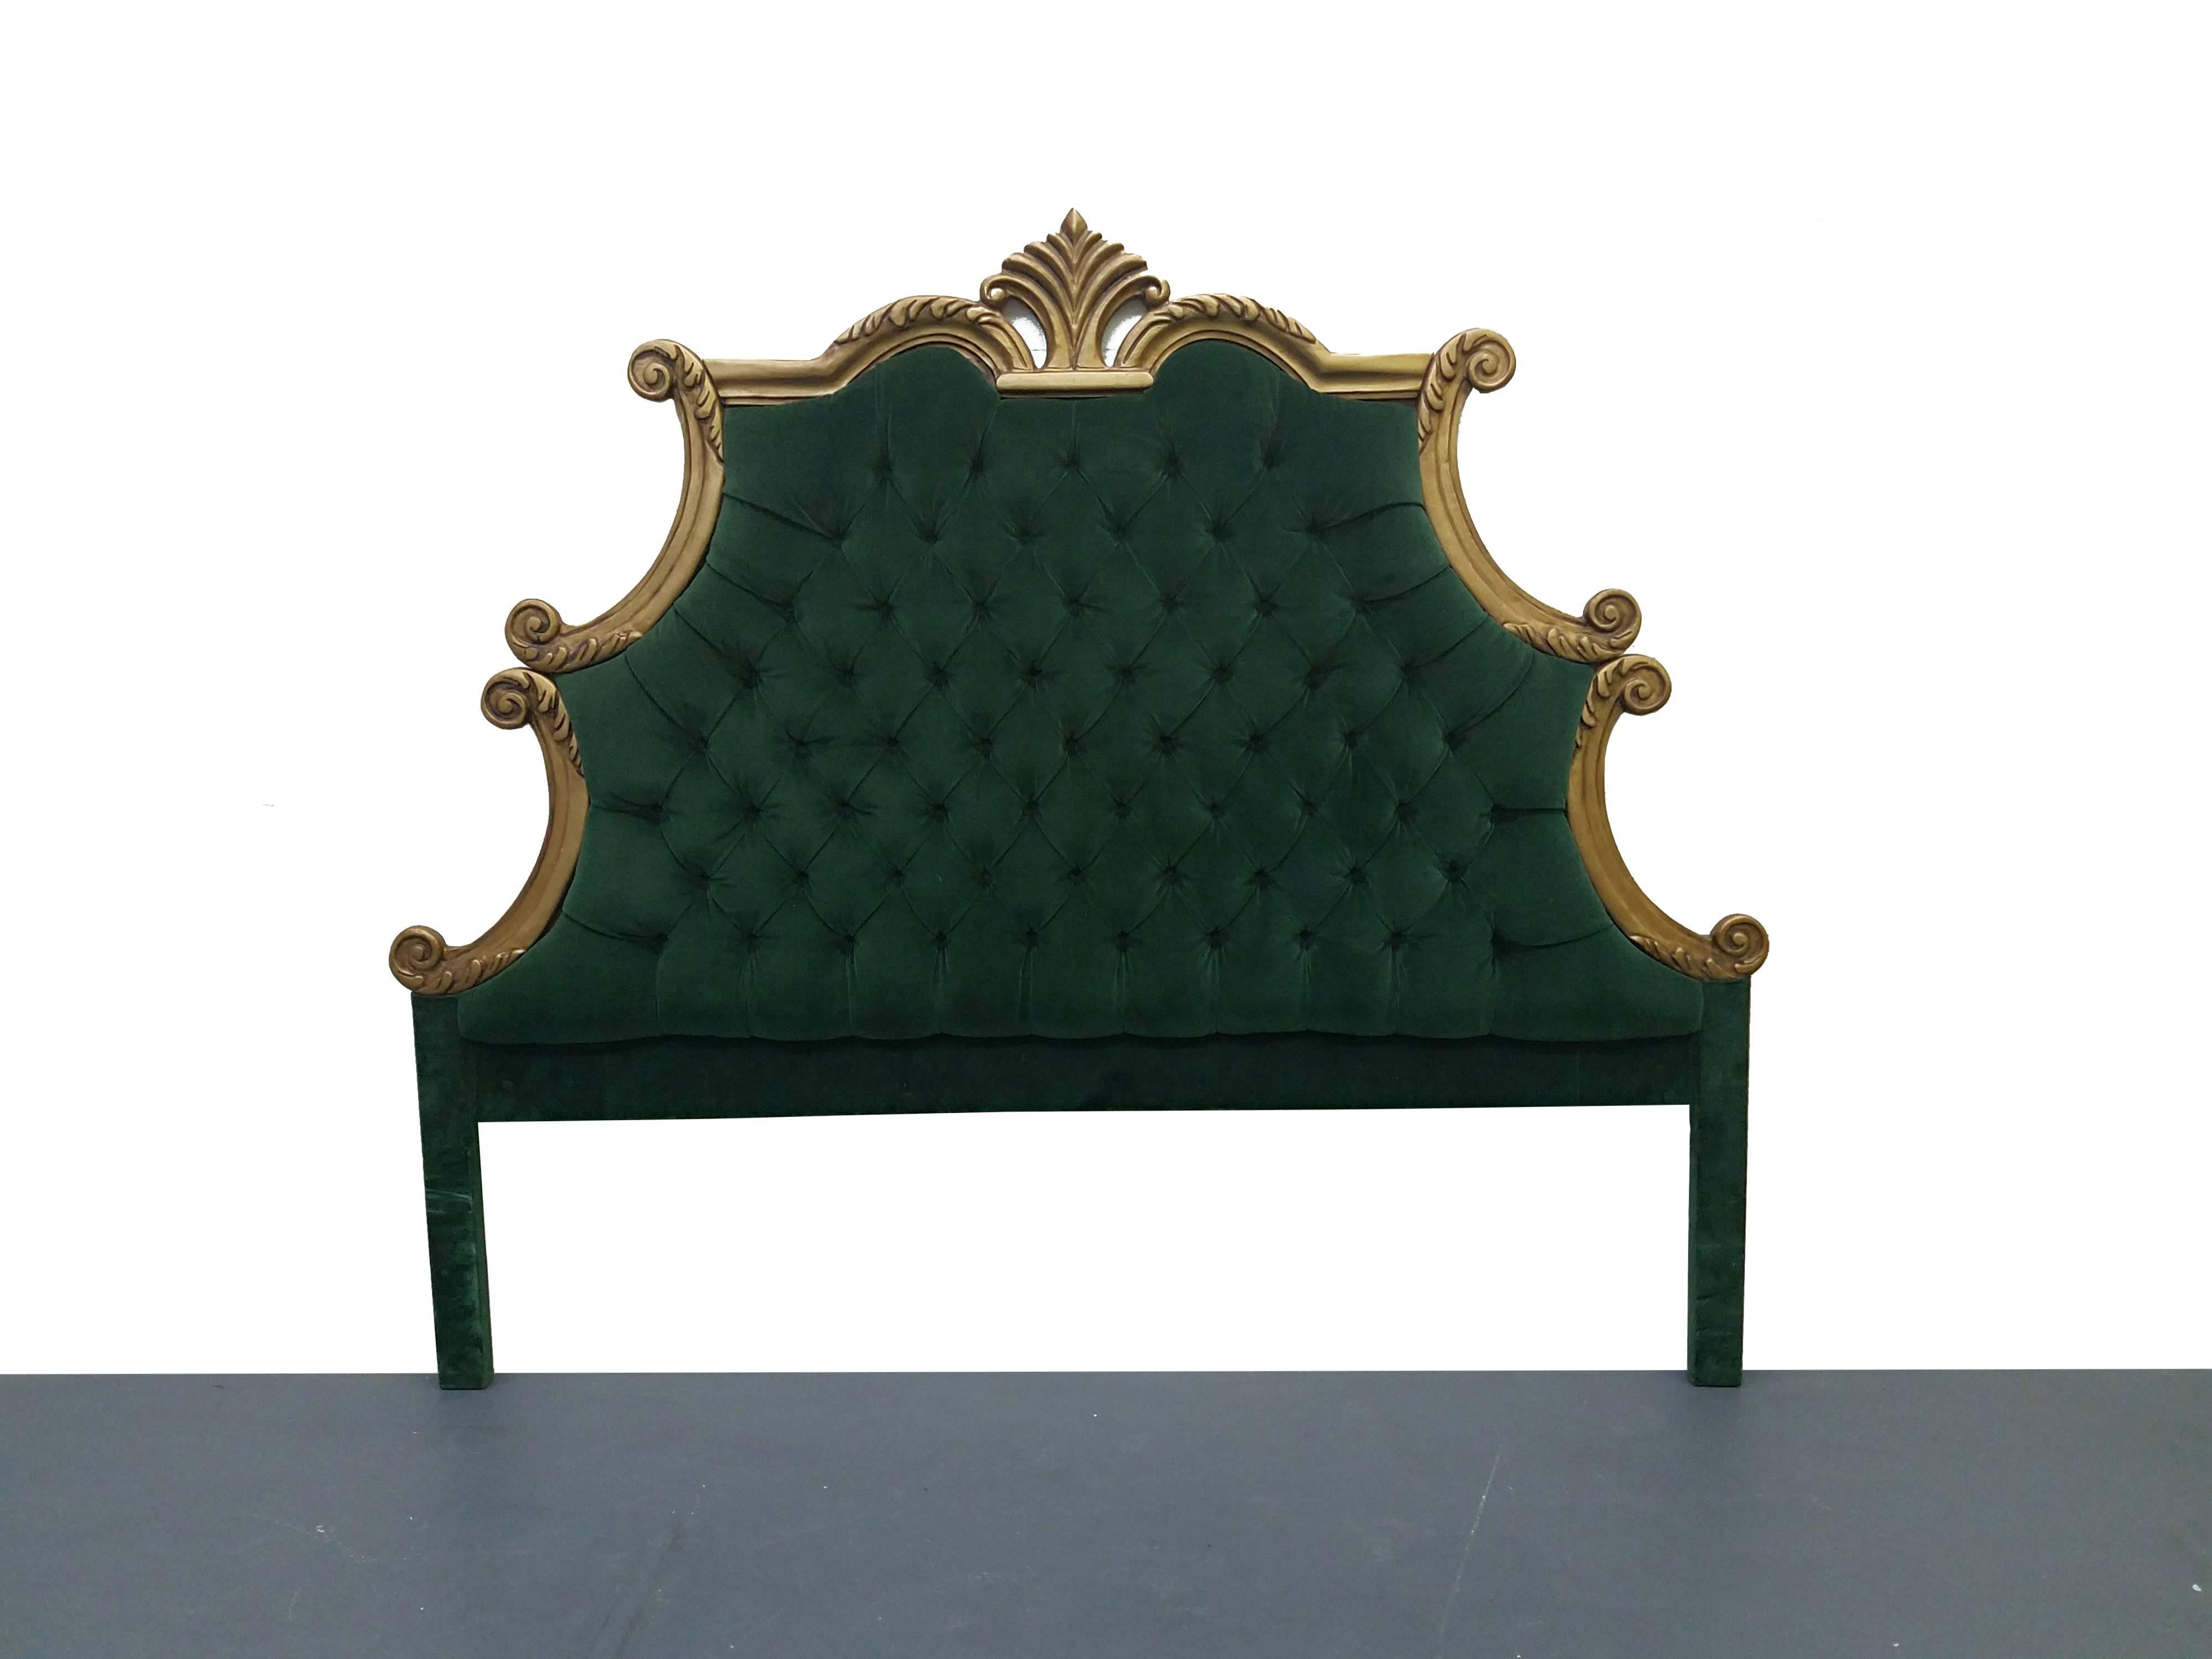 Beautiful Hollywood Regency style king-size headboard. Tufted, emerald green velvet. Beautiful color, superb condition.

Perfect for your boudoir, daughters room, or even as a photography prop.